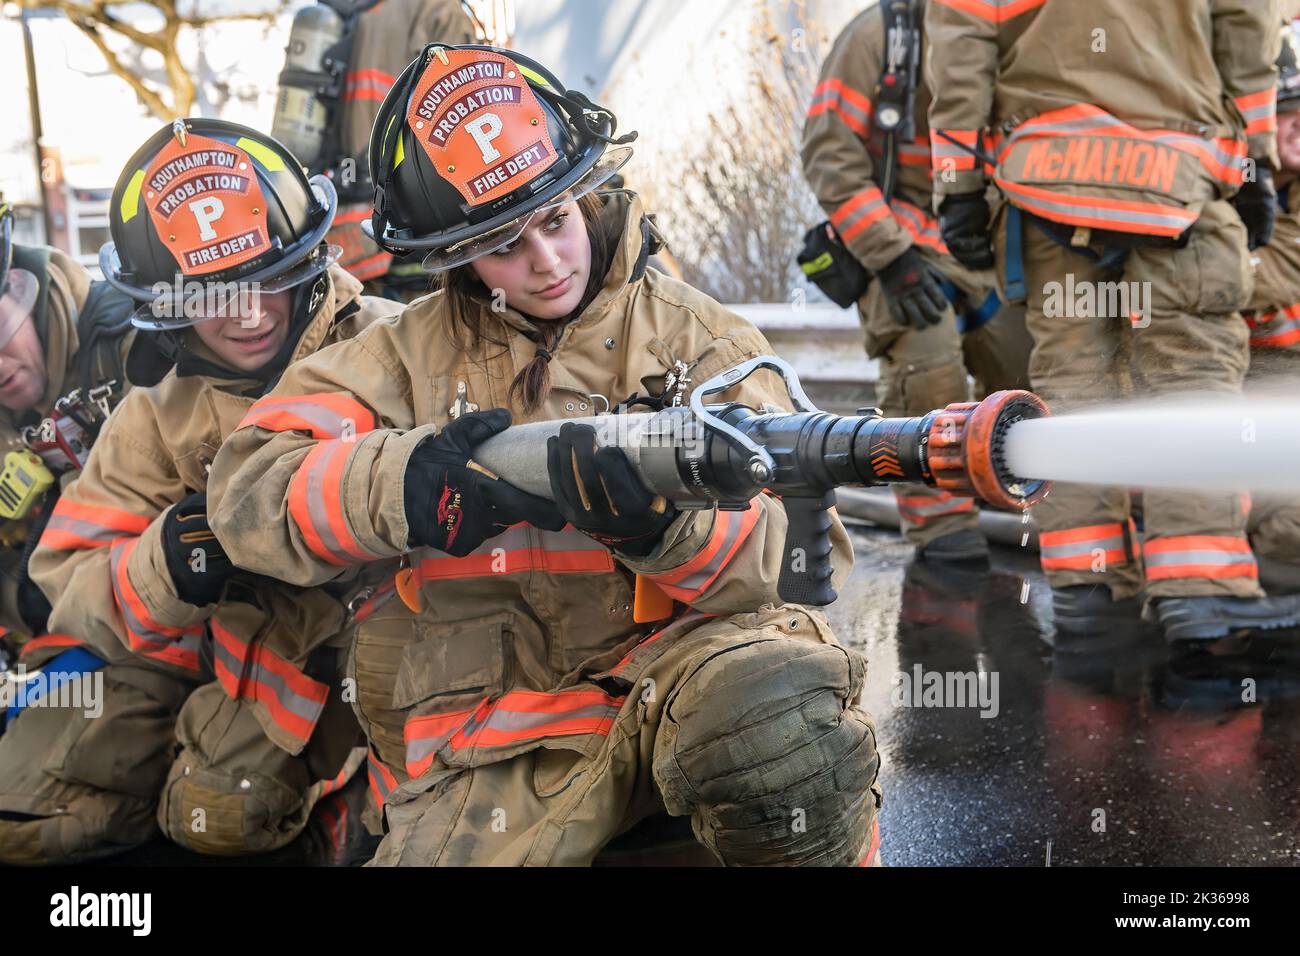 A female probationary firefighter gets practice handling the nozzle of a fire hose as the Southampton Fire Department, assisted by units and members f Stock Photo